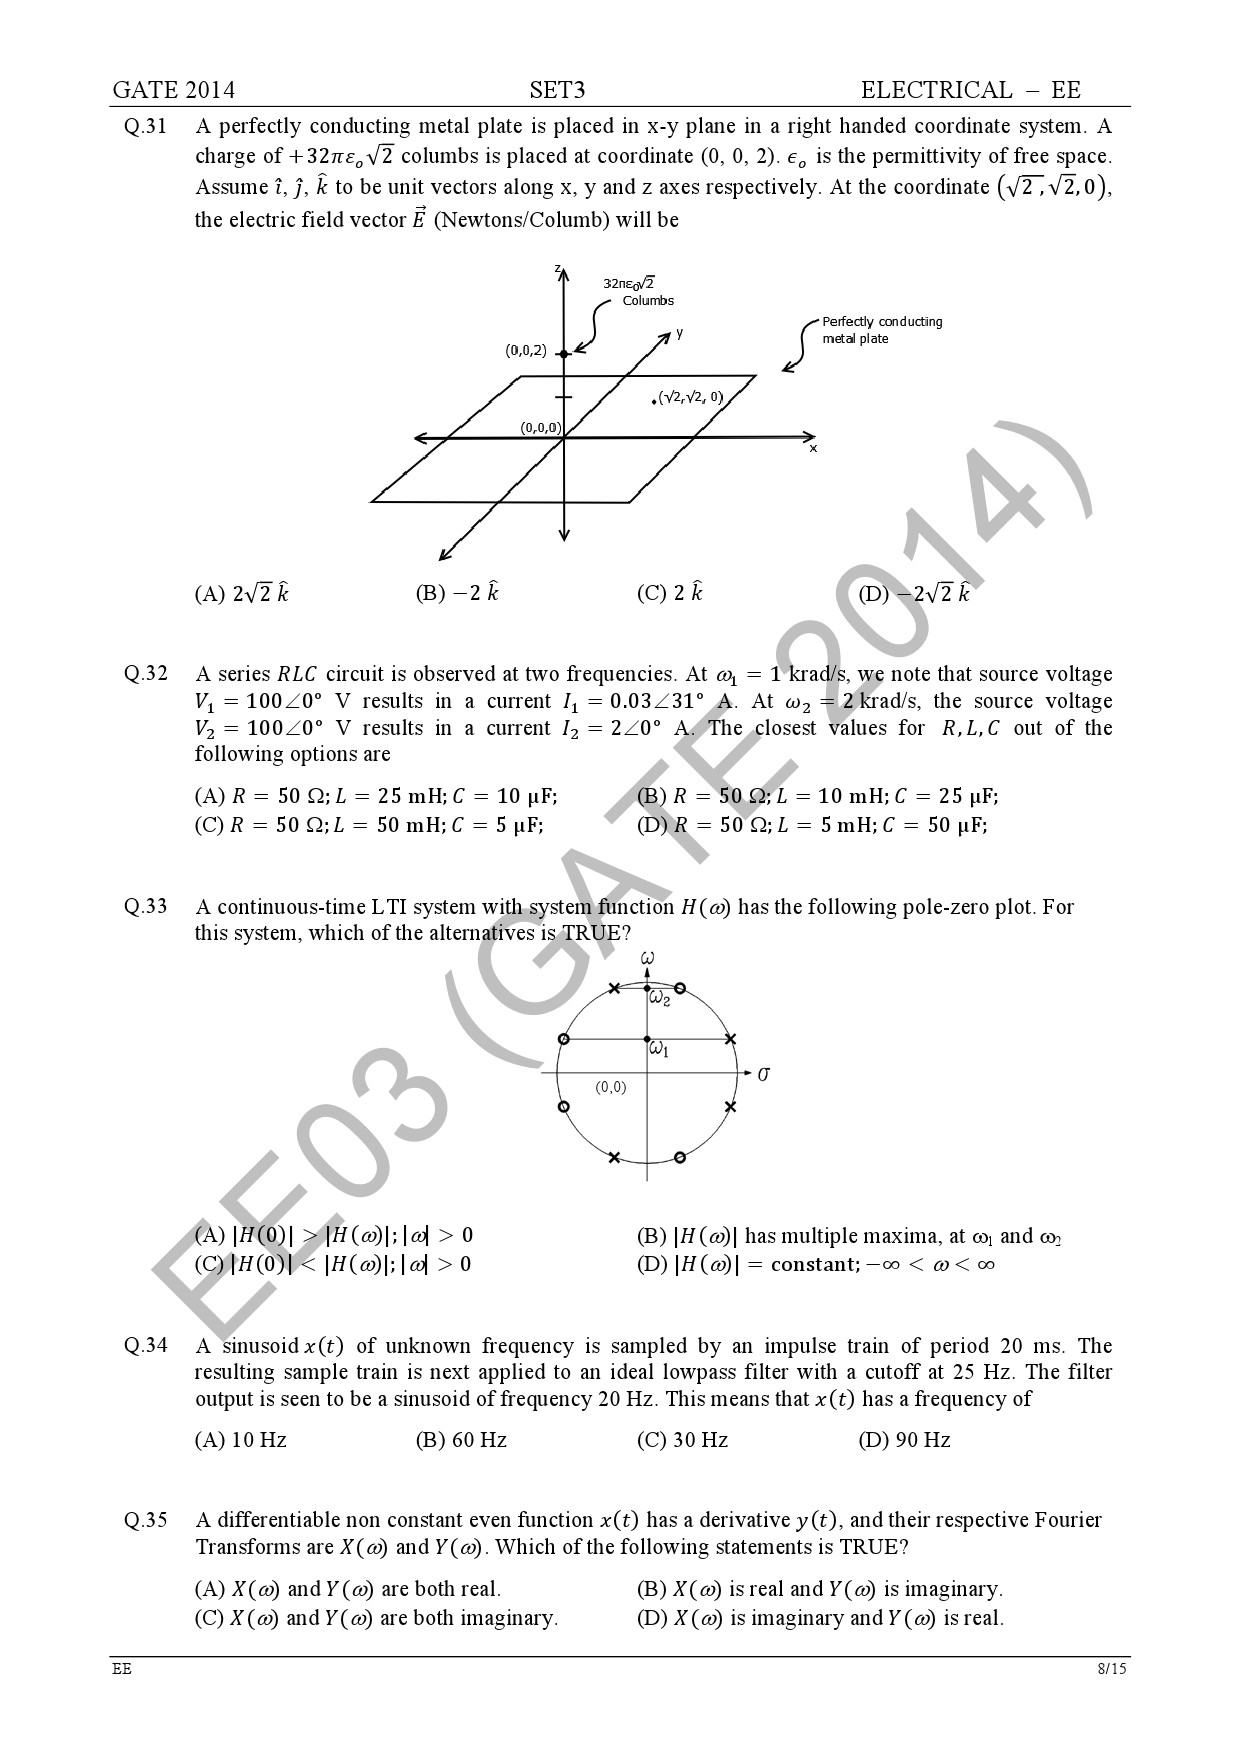 GATE Exam Question Paper 2014 Electrical Engineering Set 3 14